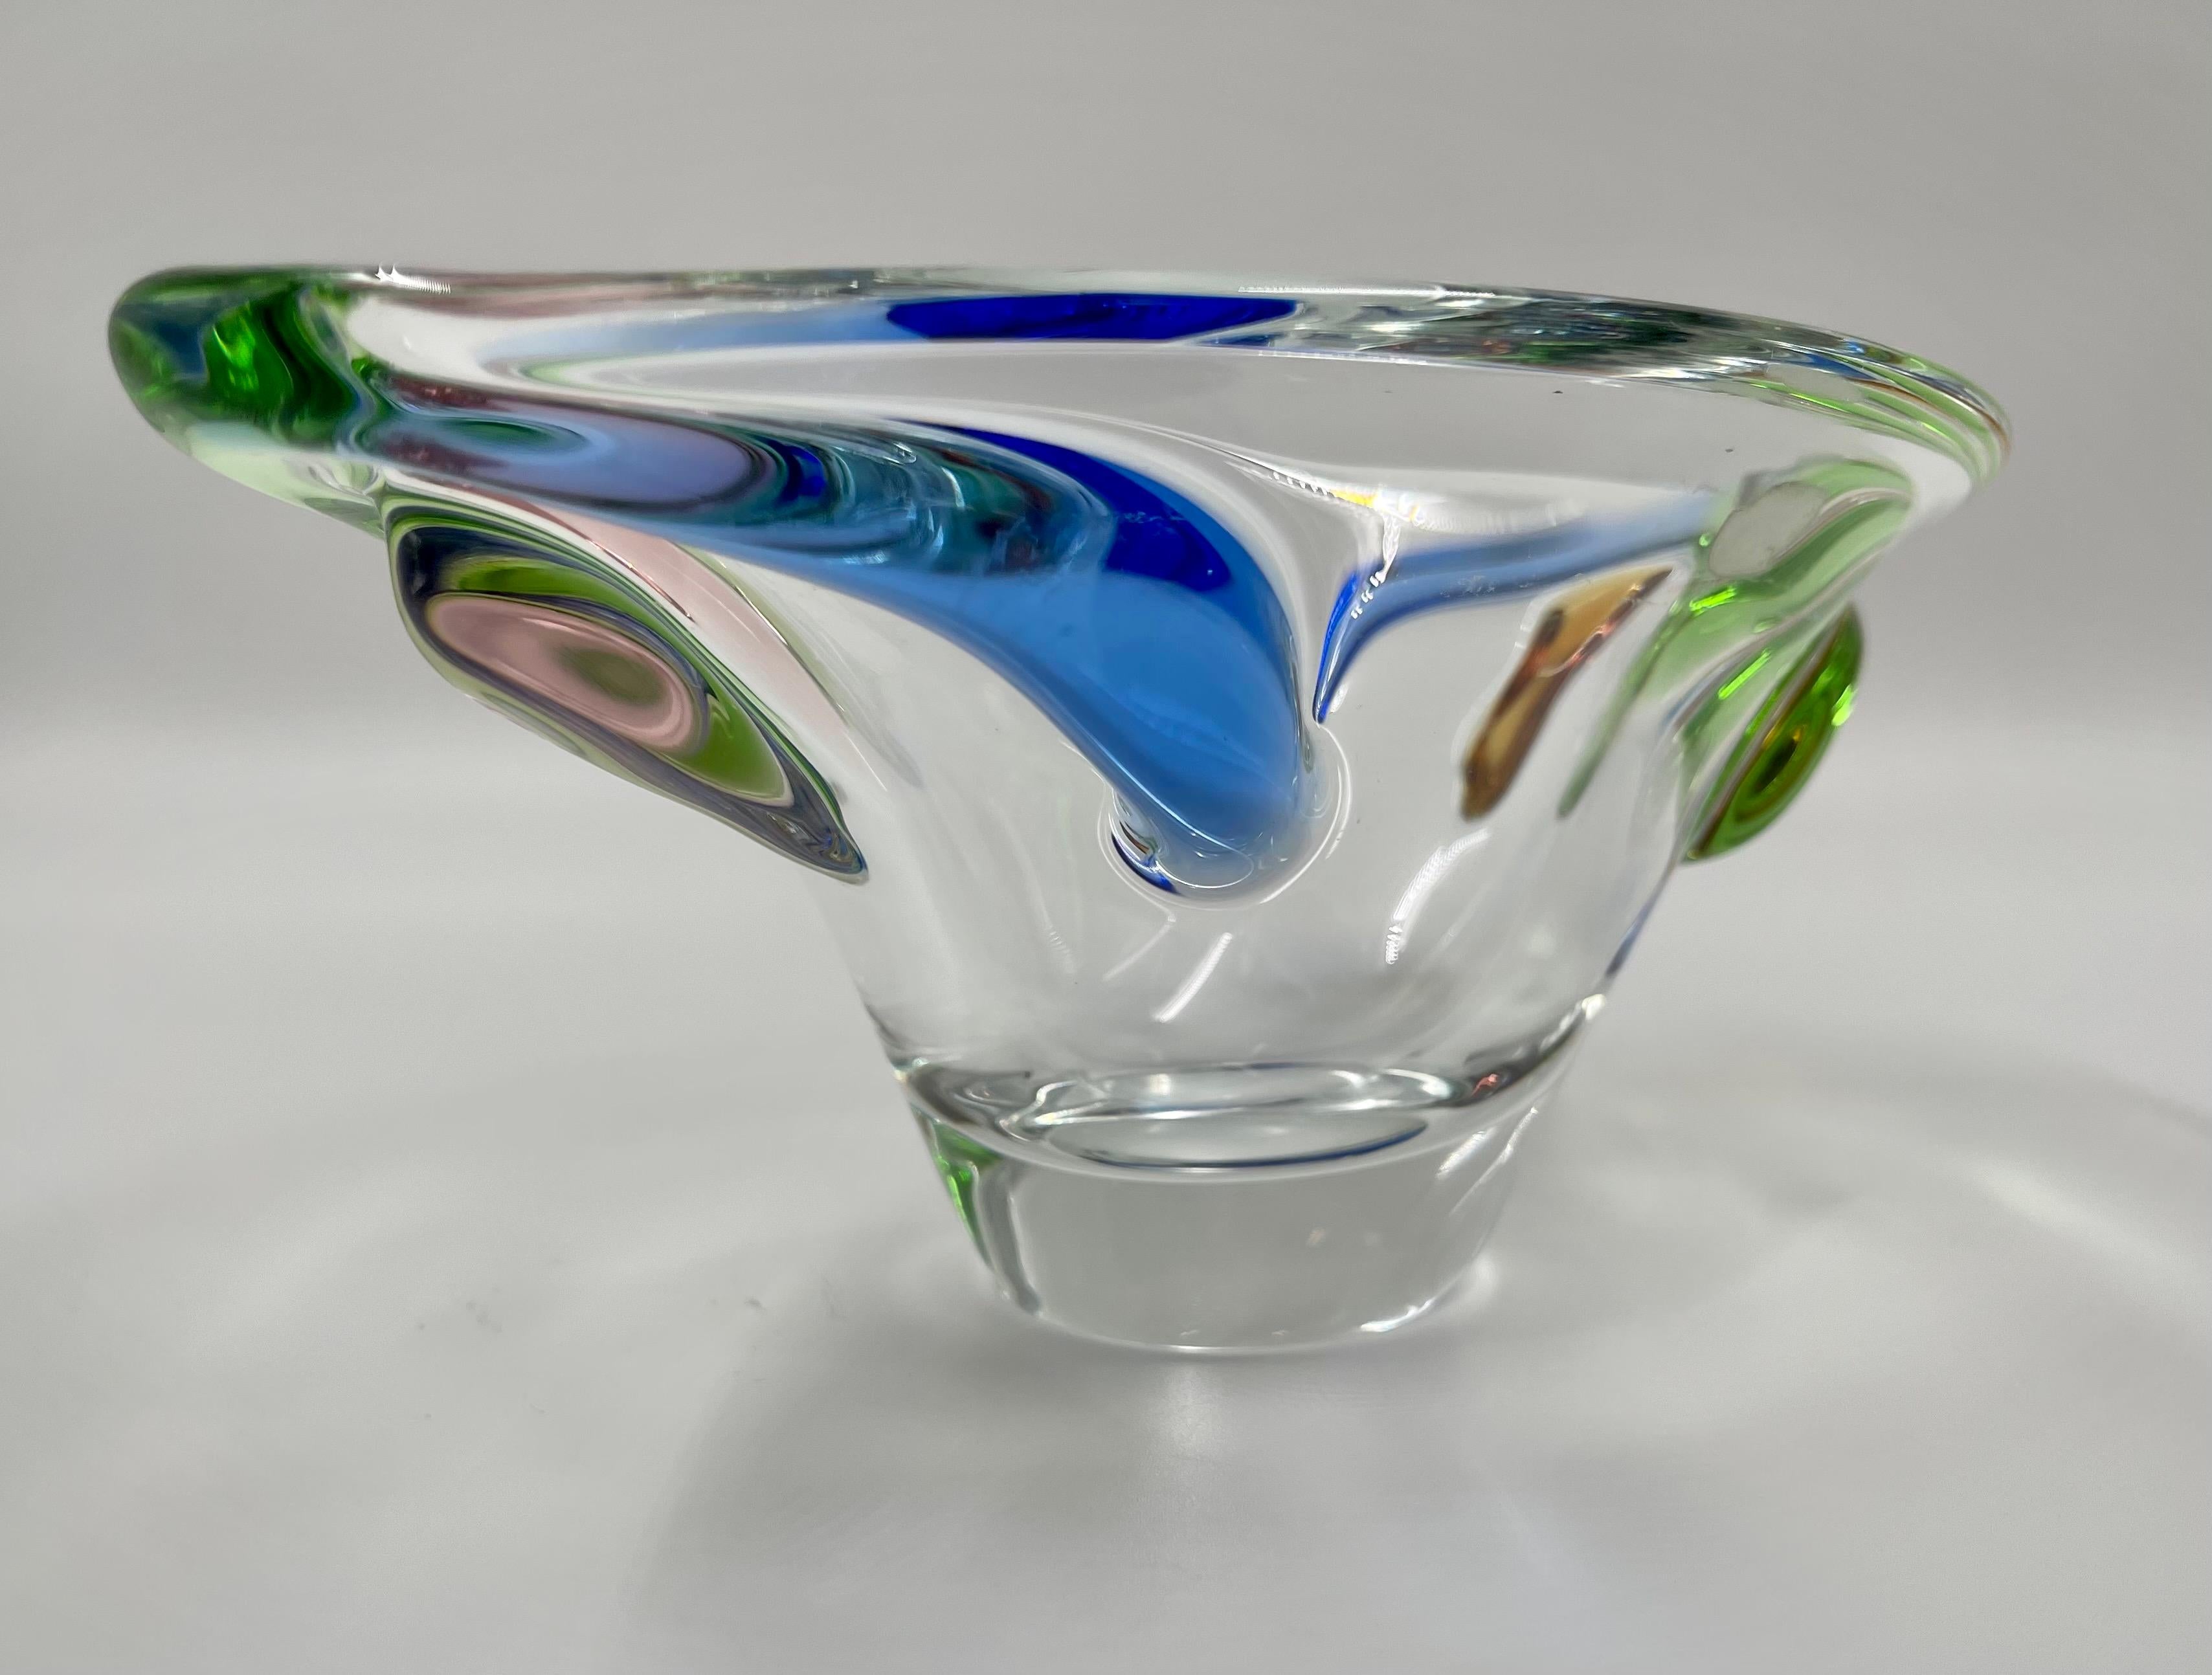 This exquisite midcentury art glass bowl is a true masterpiece, designed by the renowned Frantisek Zemek and produced by the esteemed Mstisov Glassworks in Czechoslovakia during the 1950s. It is part of the esteemed Rhapsody collection and is a